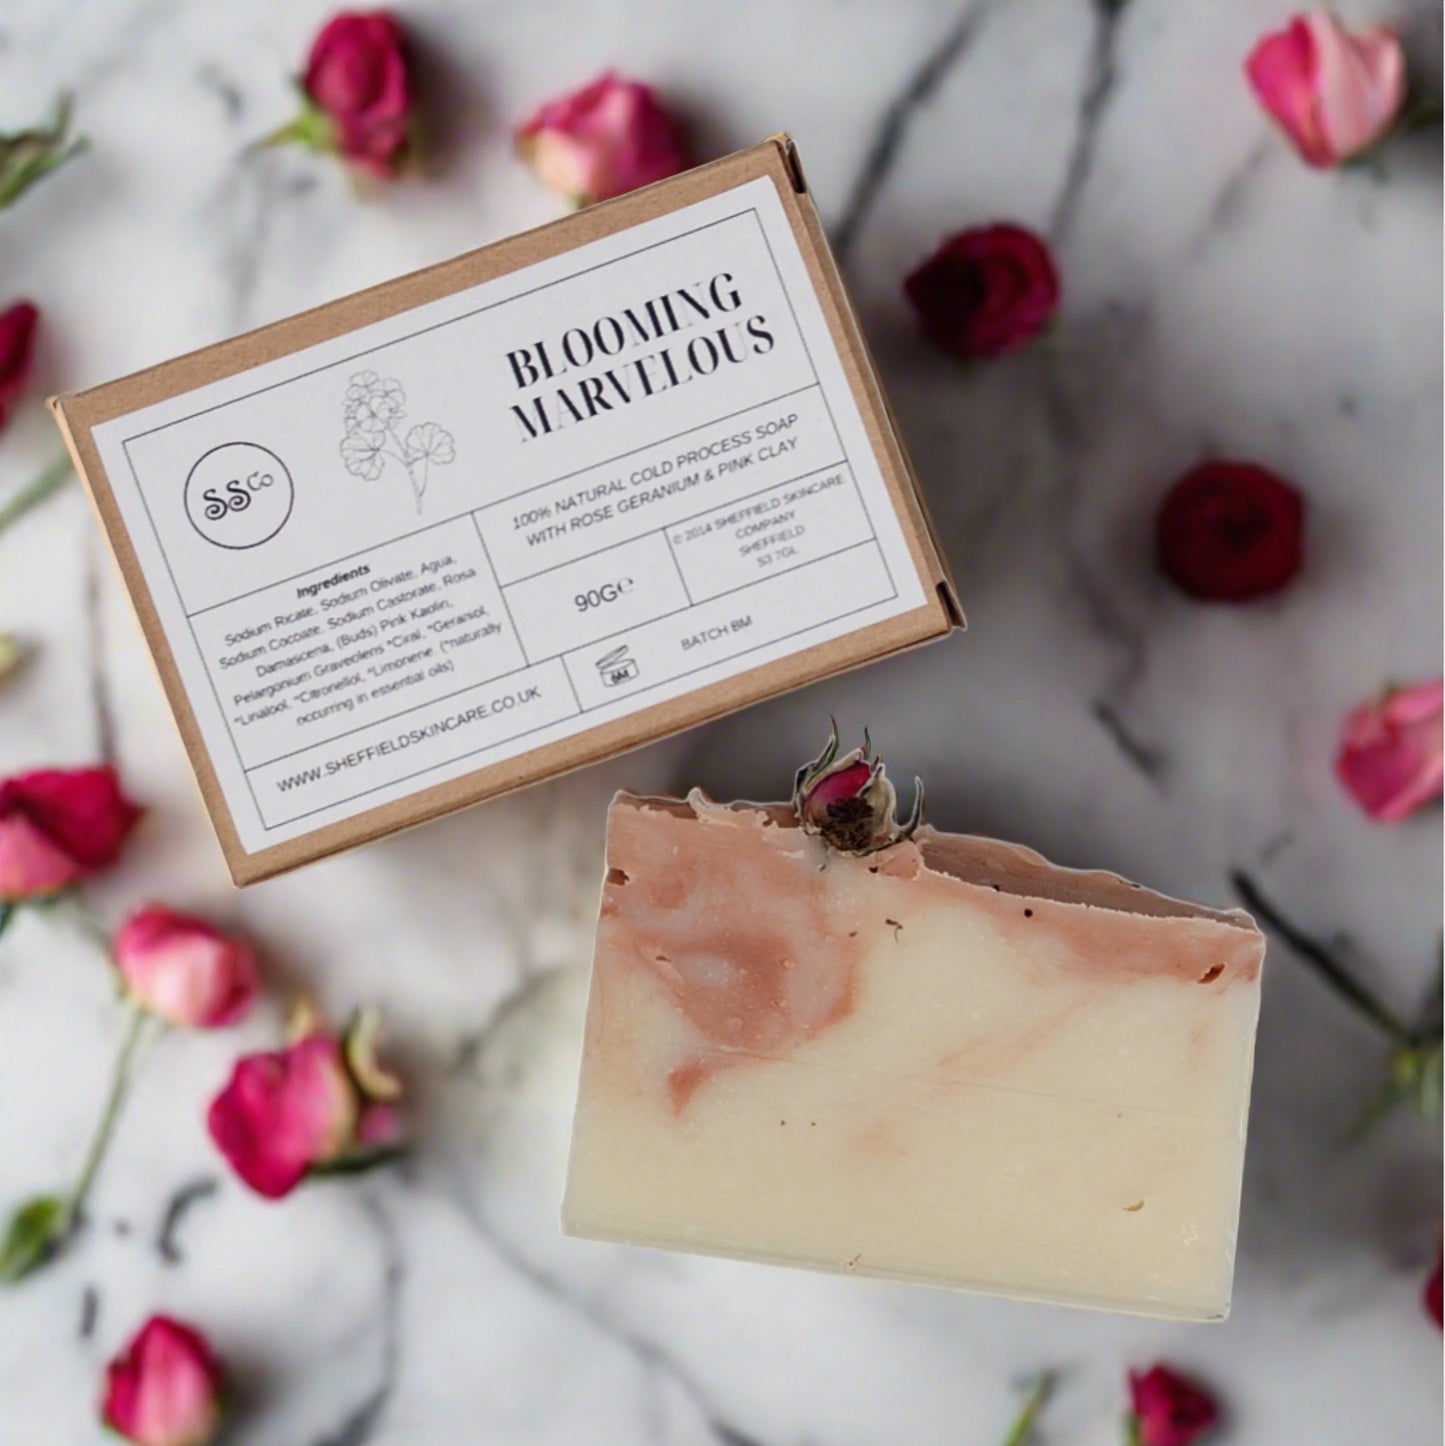 Blooming Marvellous Soap